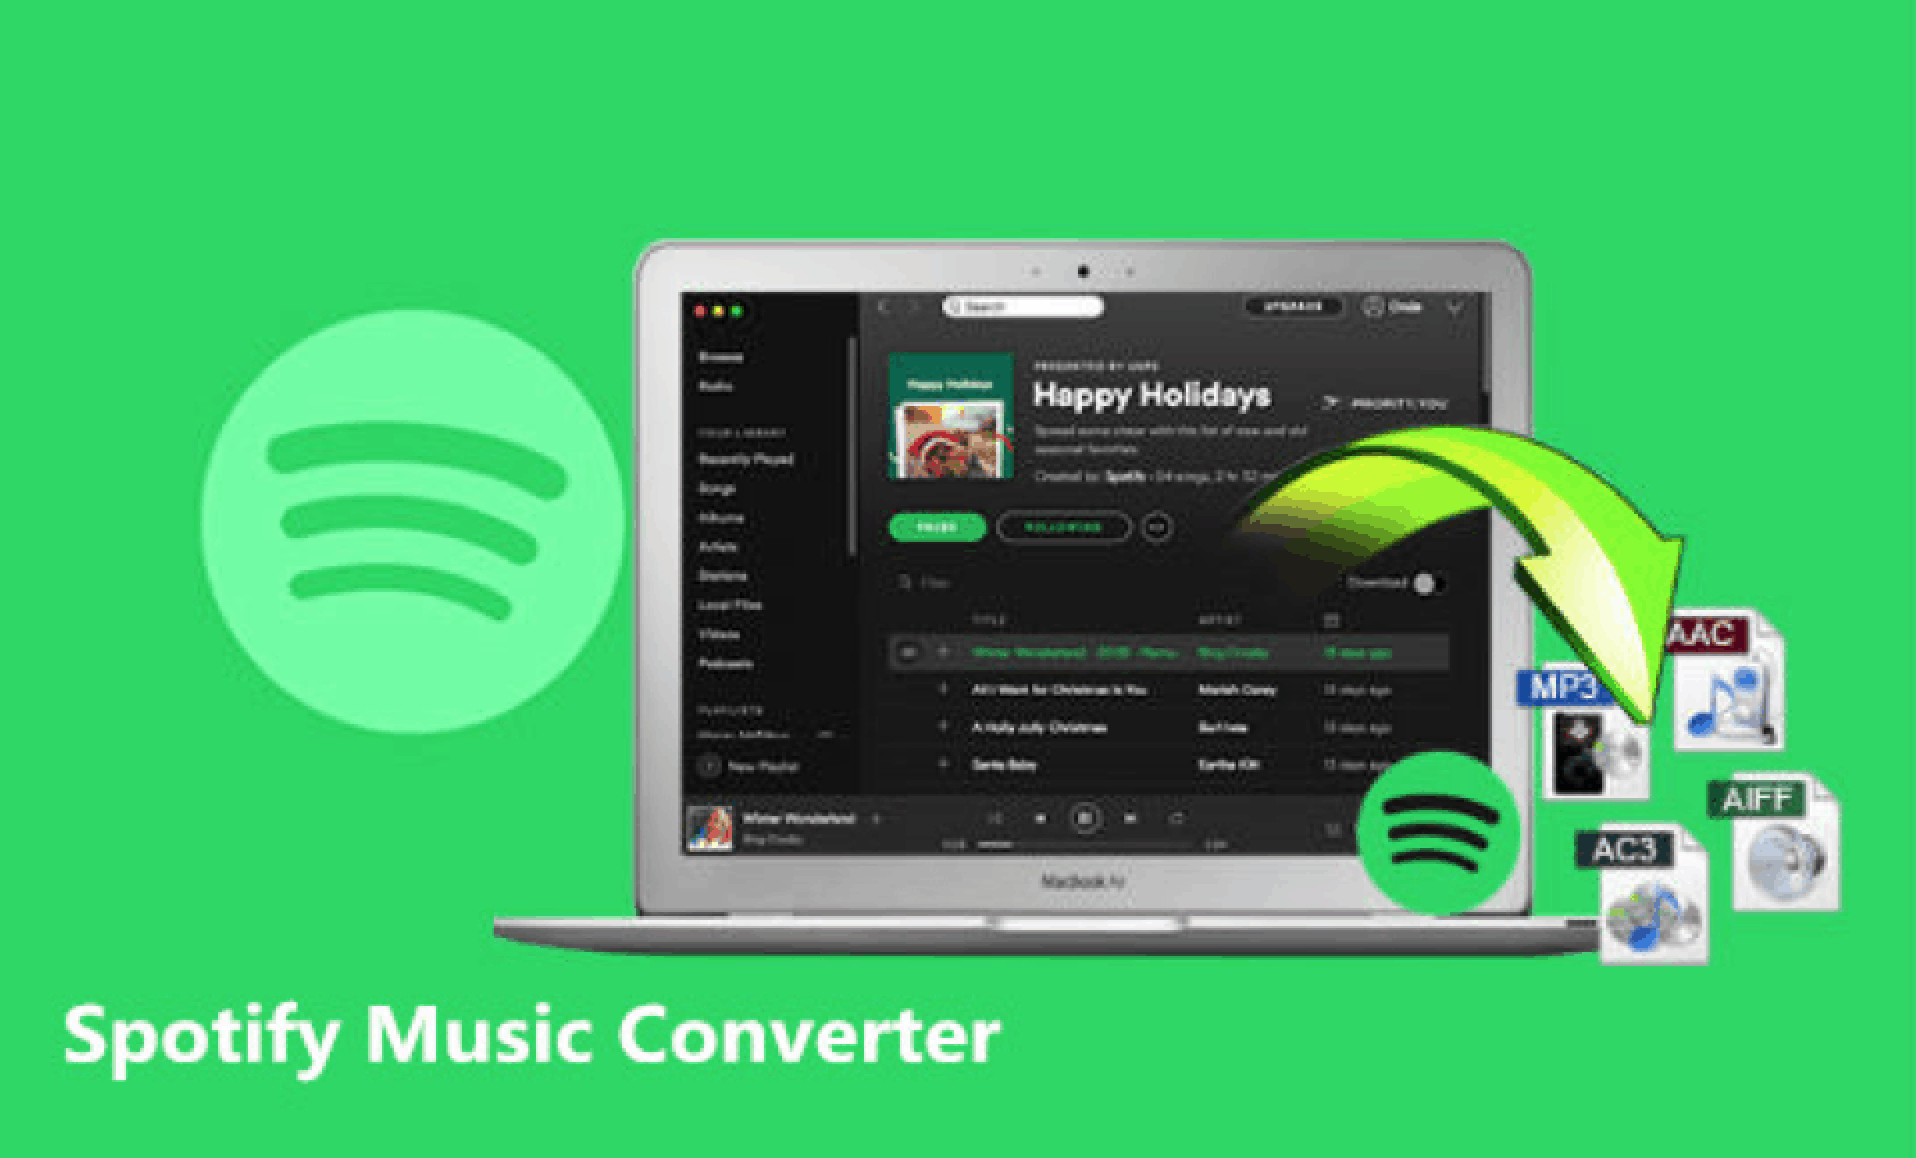 can you download from spotify to mp3